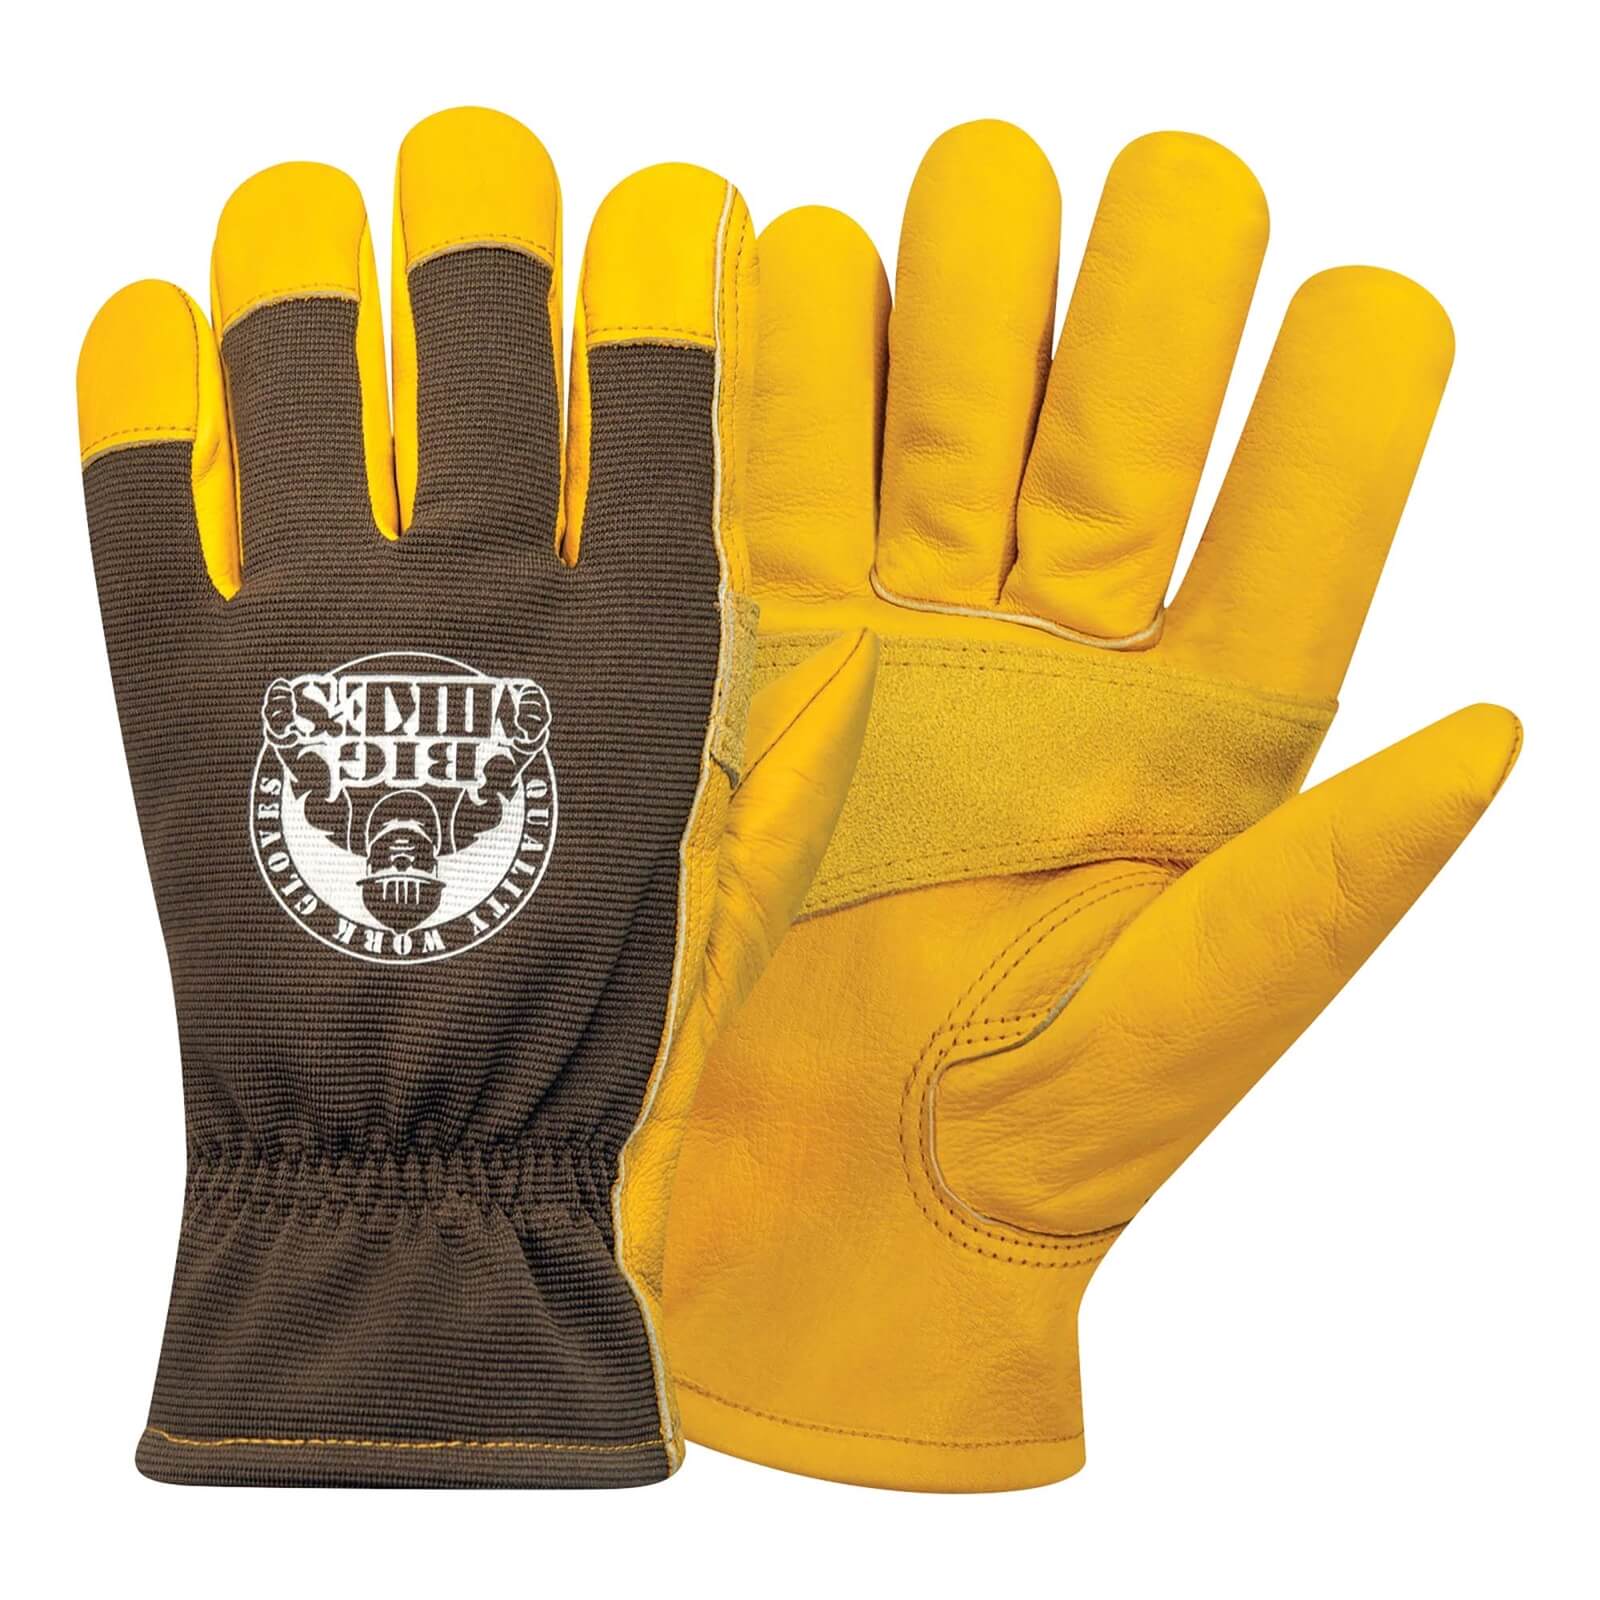 Big Mike's Leather Lined Winter Work Gloves - Extra Large